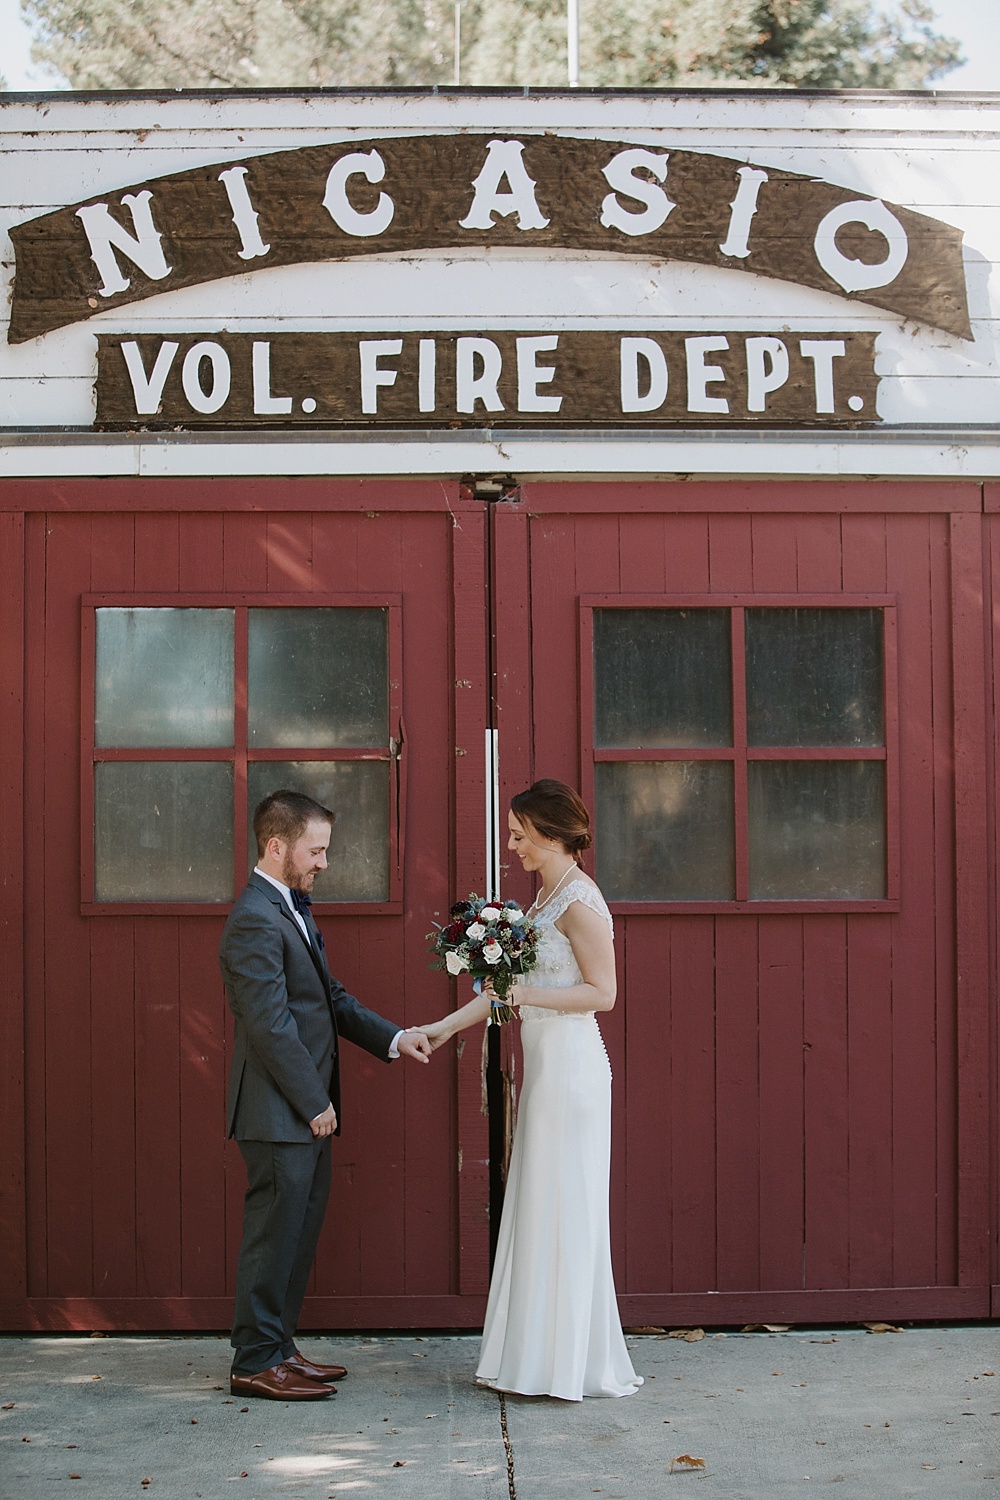 First look at Rancho Nicasio wedding by amy thompson photography